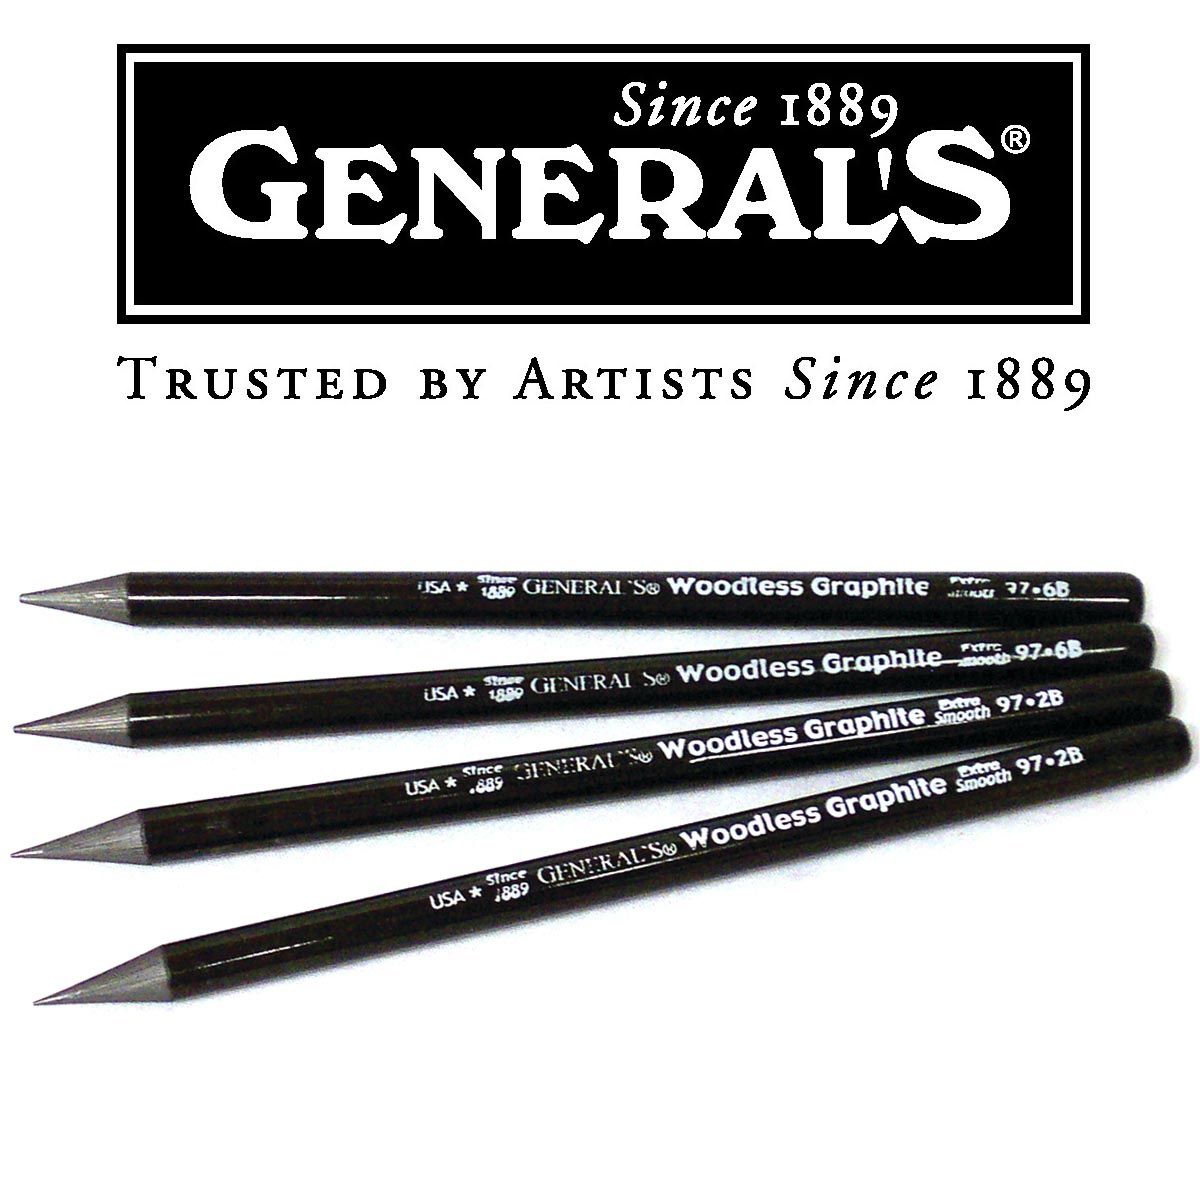 General's Woodless Graphite Pencils Open Stock